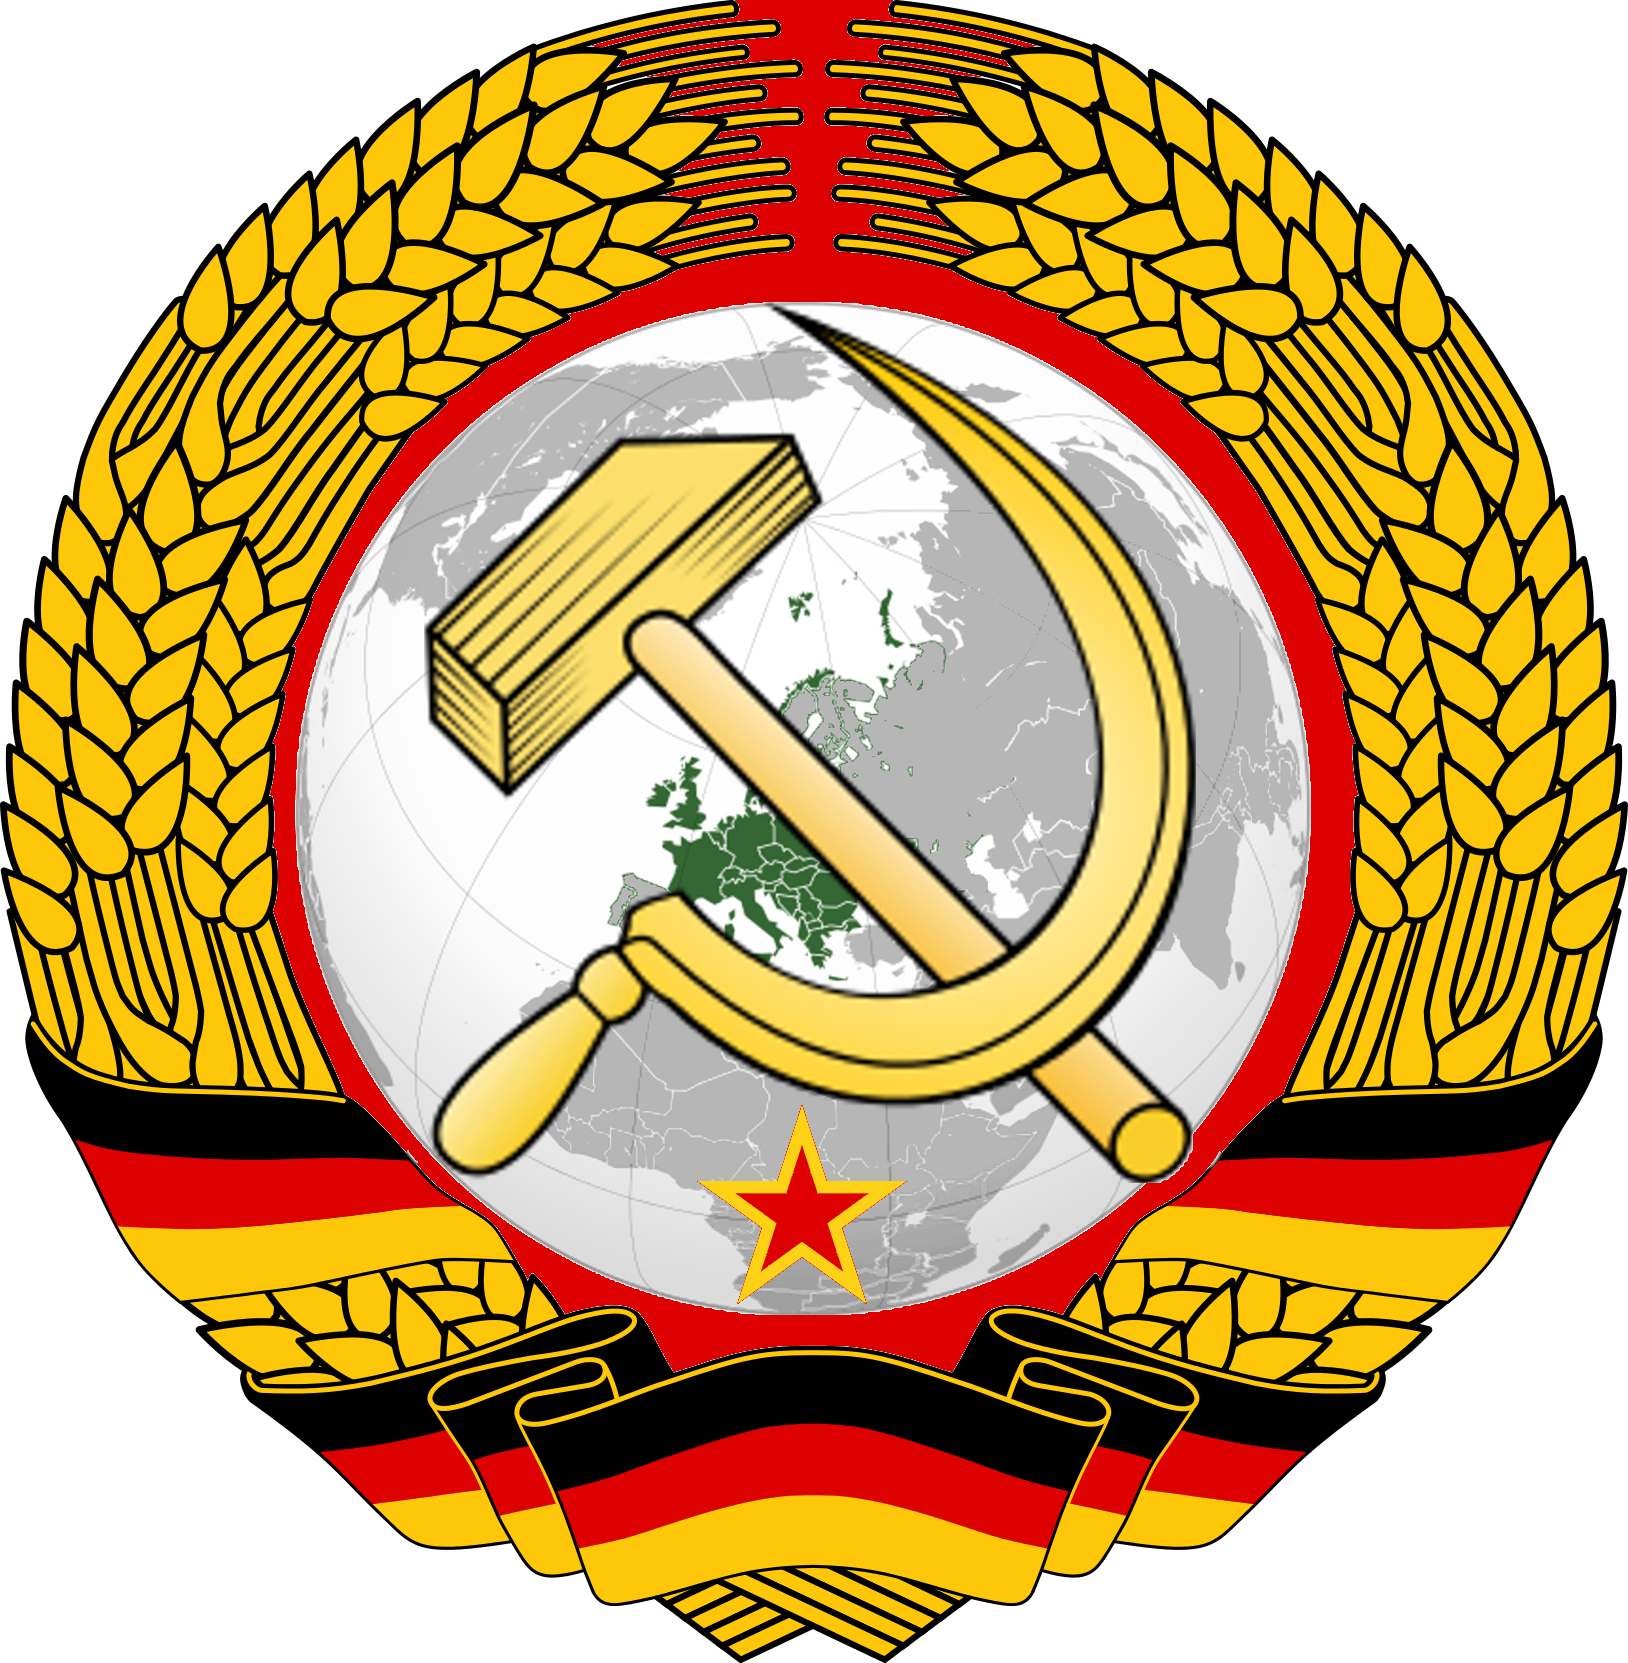 Value German Code Of Arms Image Coat The Great Republic - East Germany Logo (1628x1663)